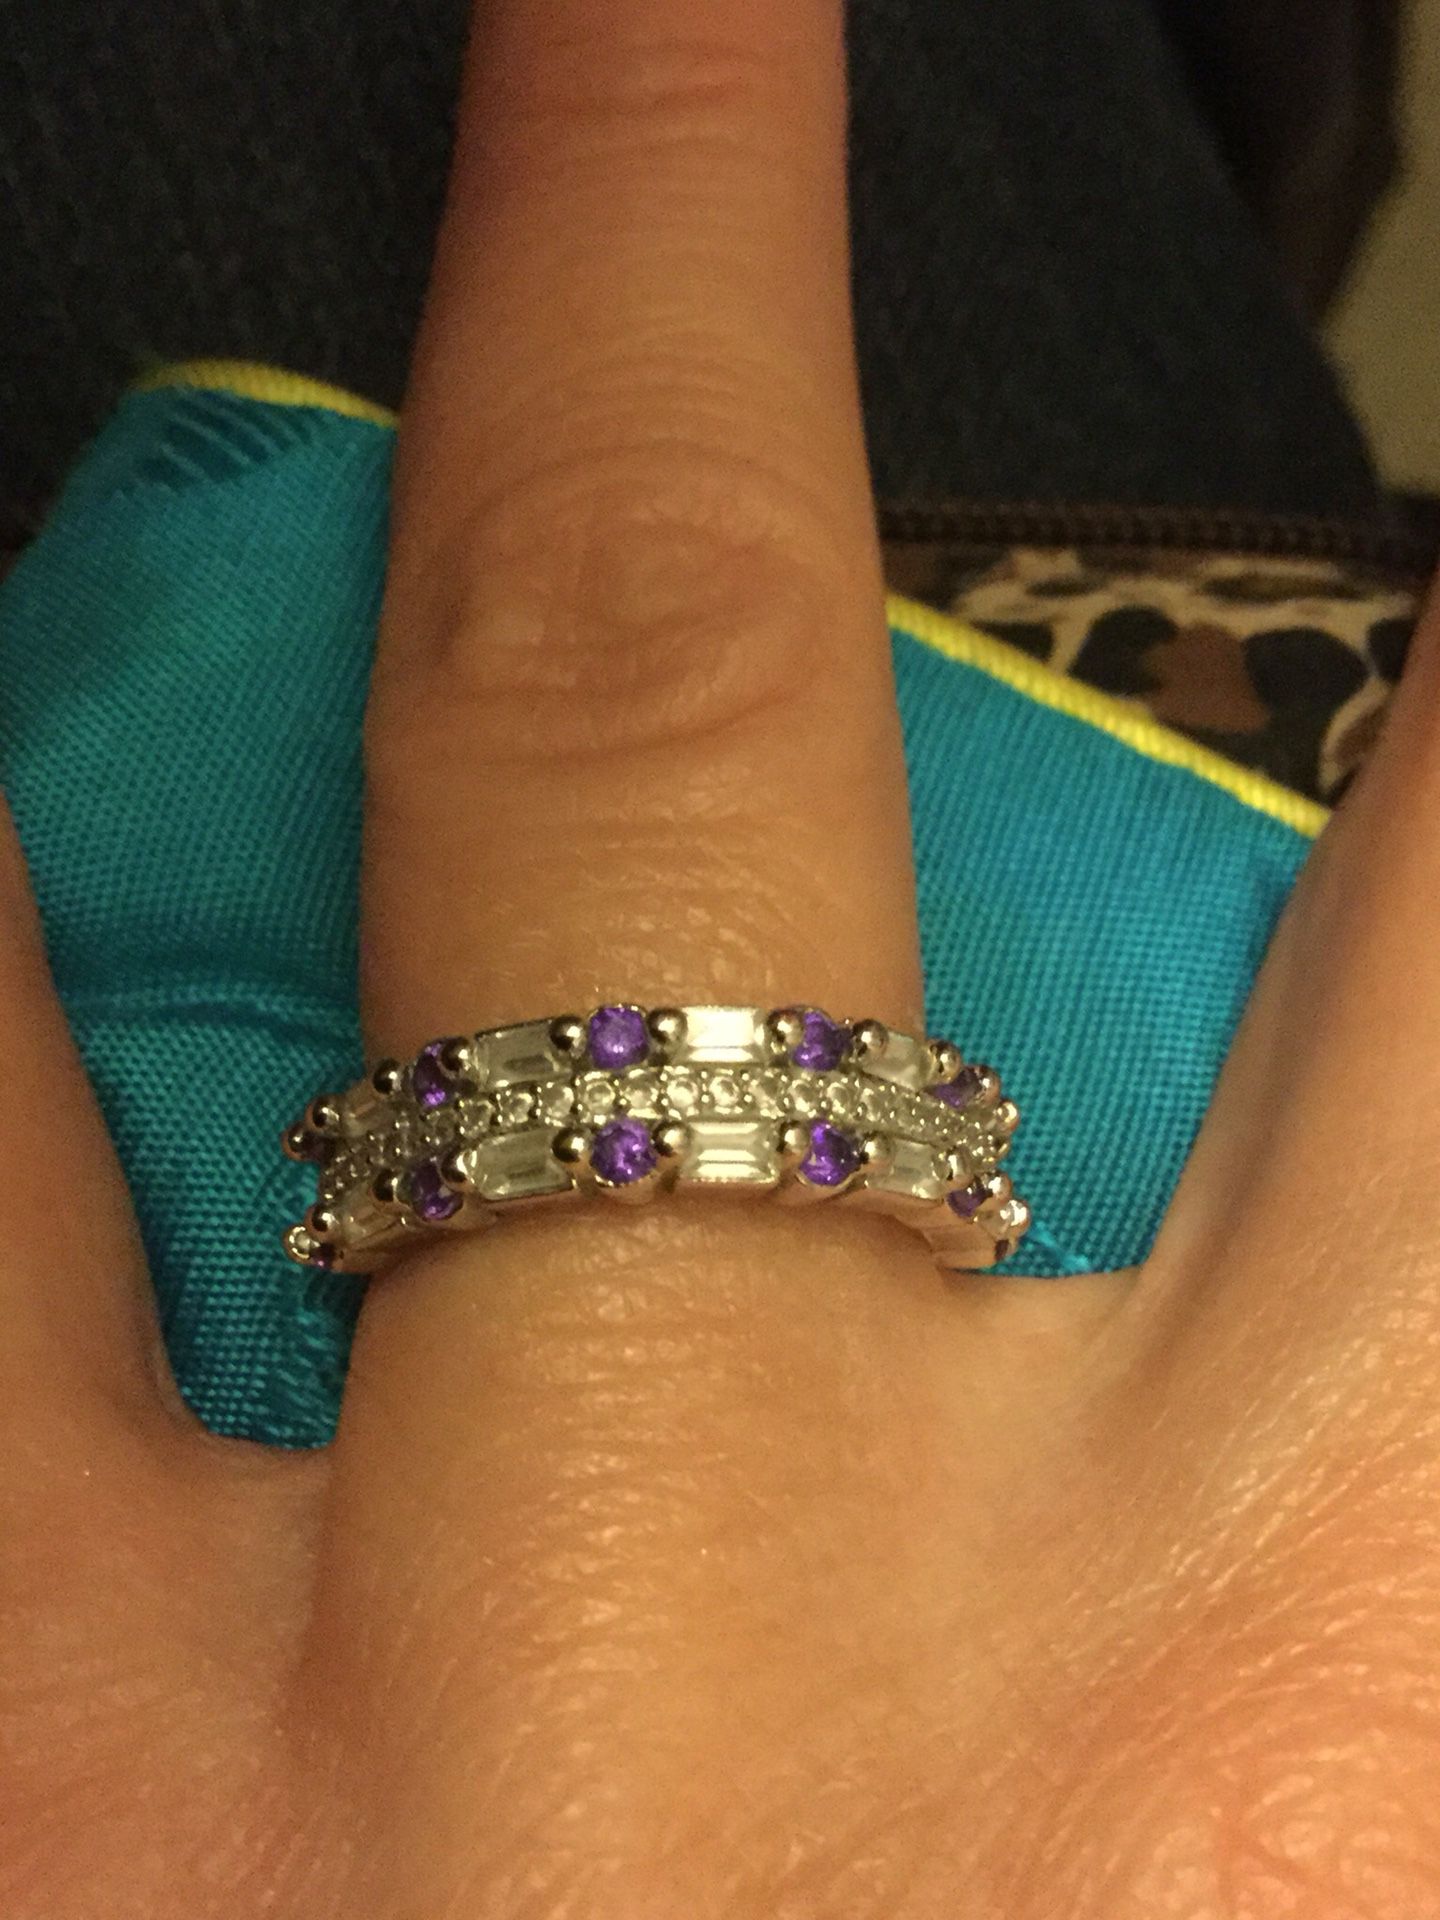 Beautiful 925 stamped Silver and white gold filled Muti Sapphire Ring / Size #5 NEW Jewelry 💍💜💍💜💍💜💍